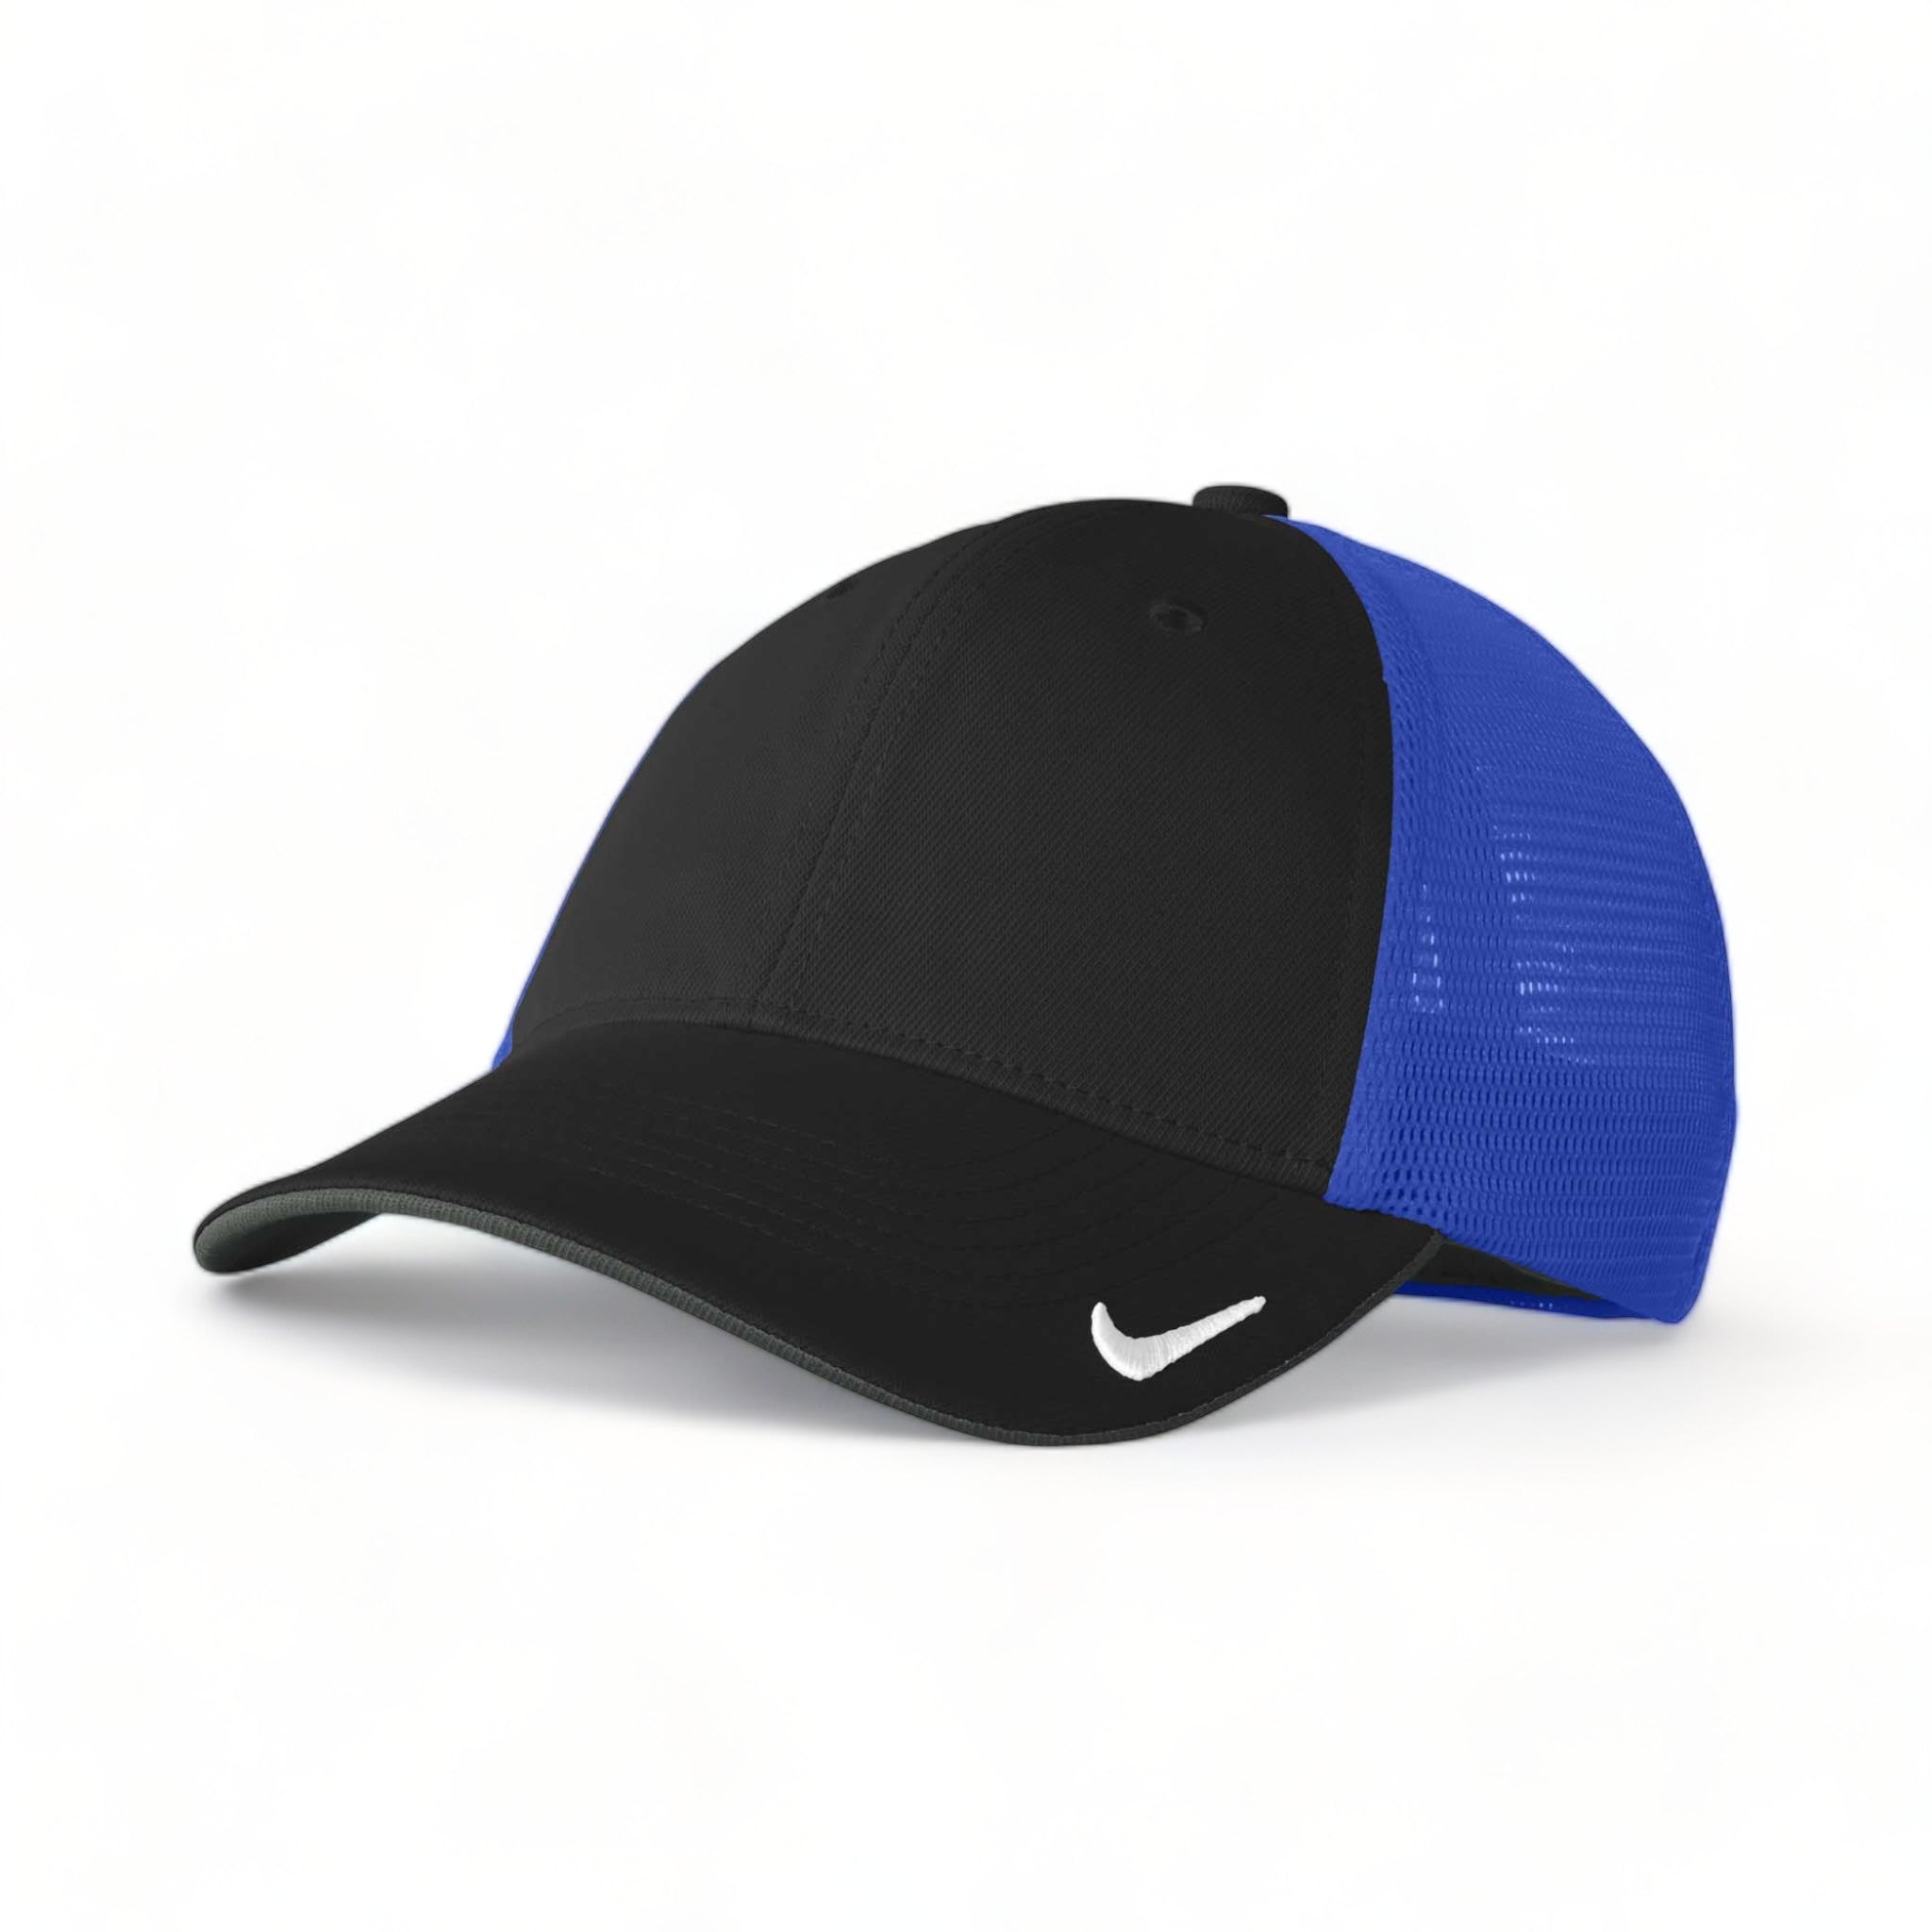 Side view of Nike NKFB6448 custom hat in black and game royal